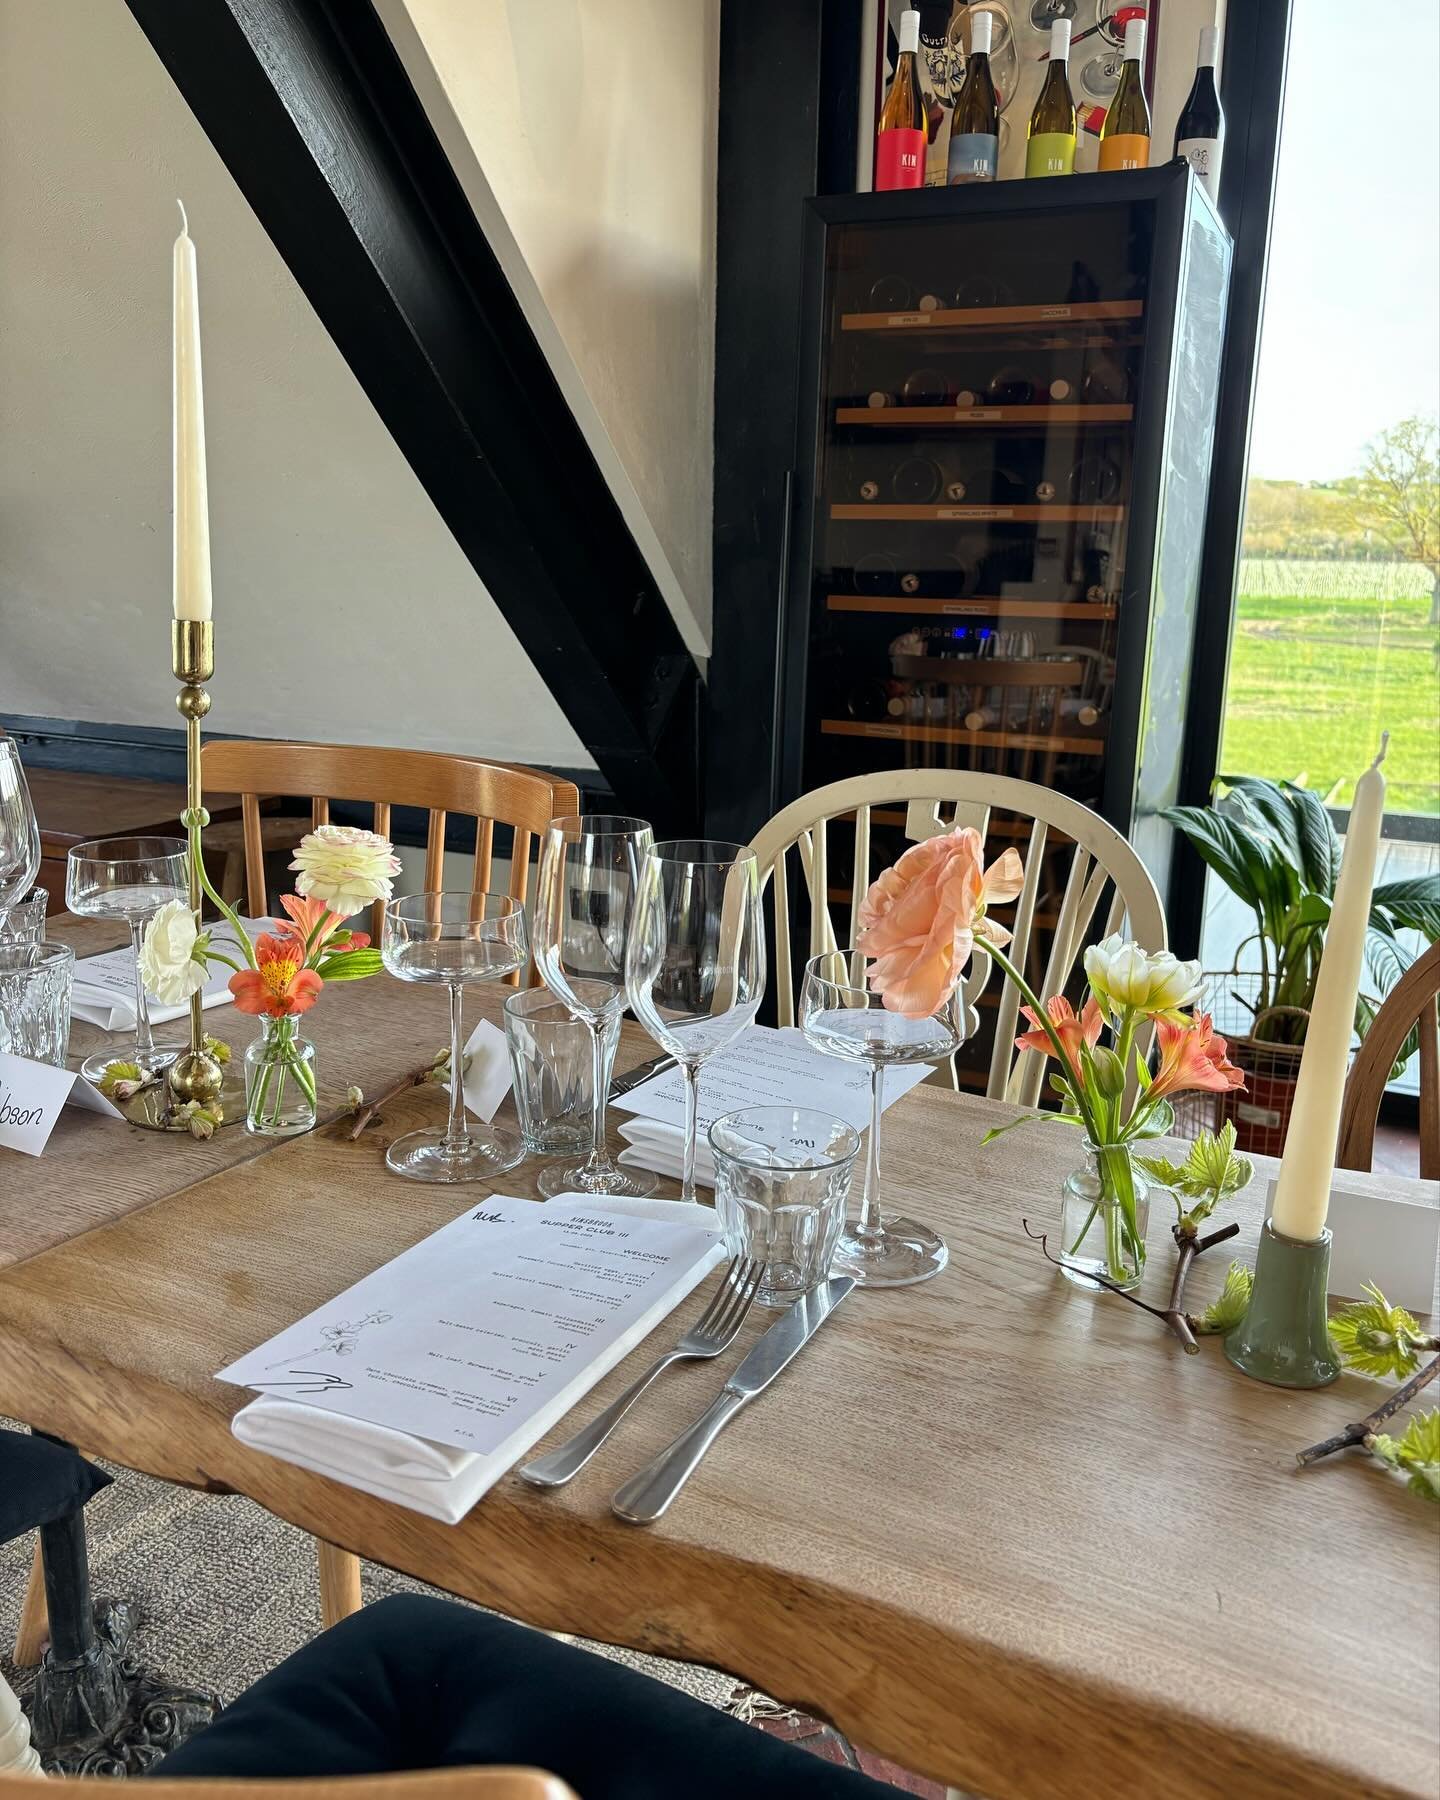 On Saturday night, we hosted Supper Club III at Kinsbrook Farmhouse 💫 

This magical event included all our favourite hallmarks of a Kinsbrook Supper Club, including a banging 6 course tasting menu designed by incredible Guest Chef duo James Mcilvee